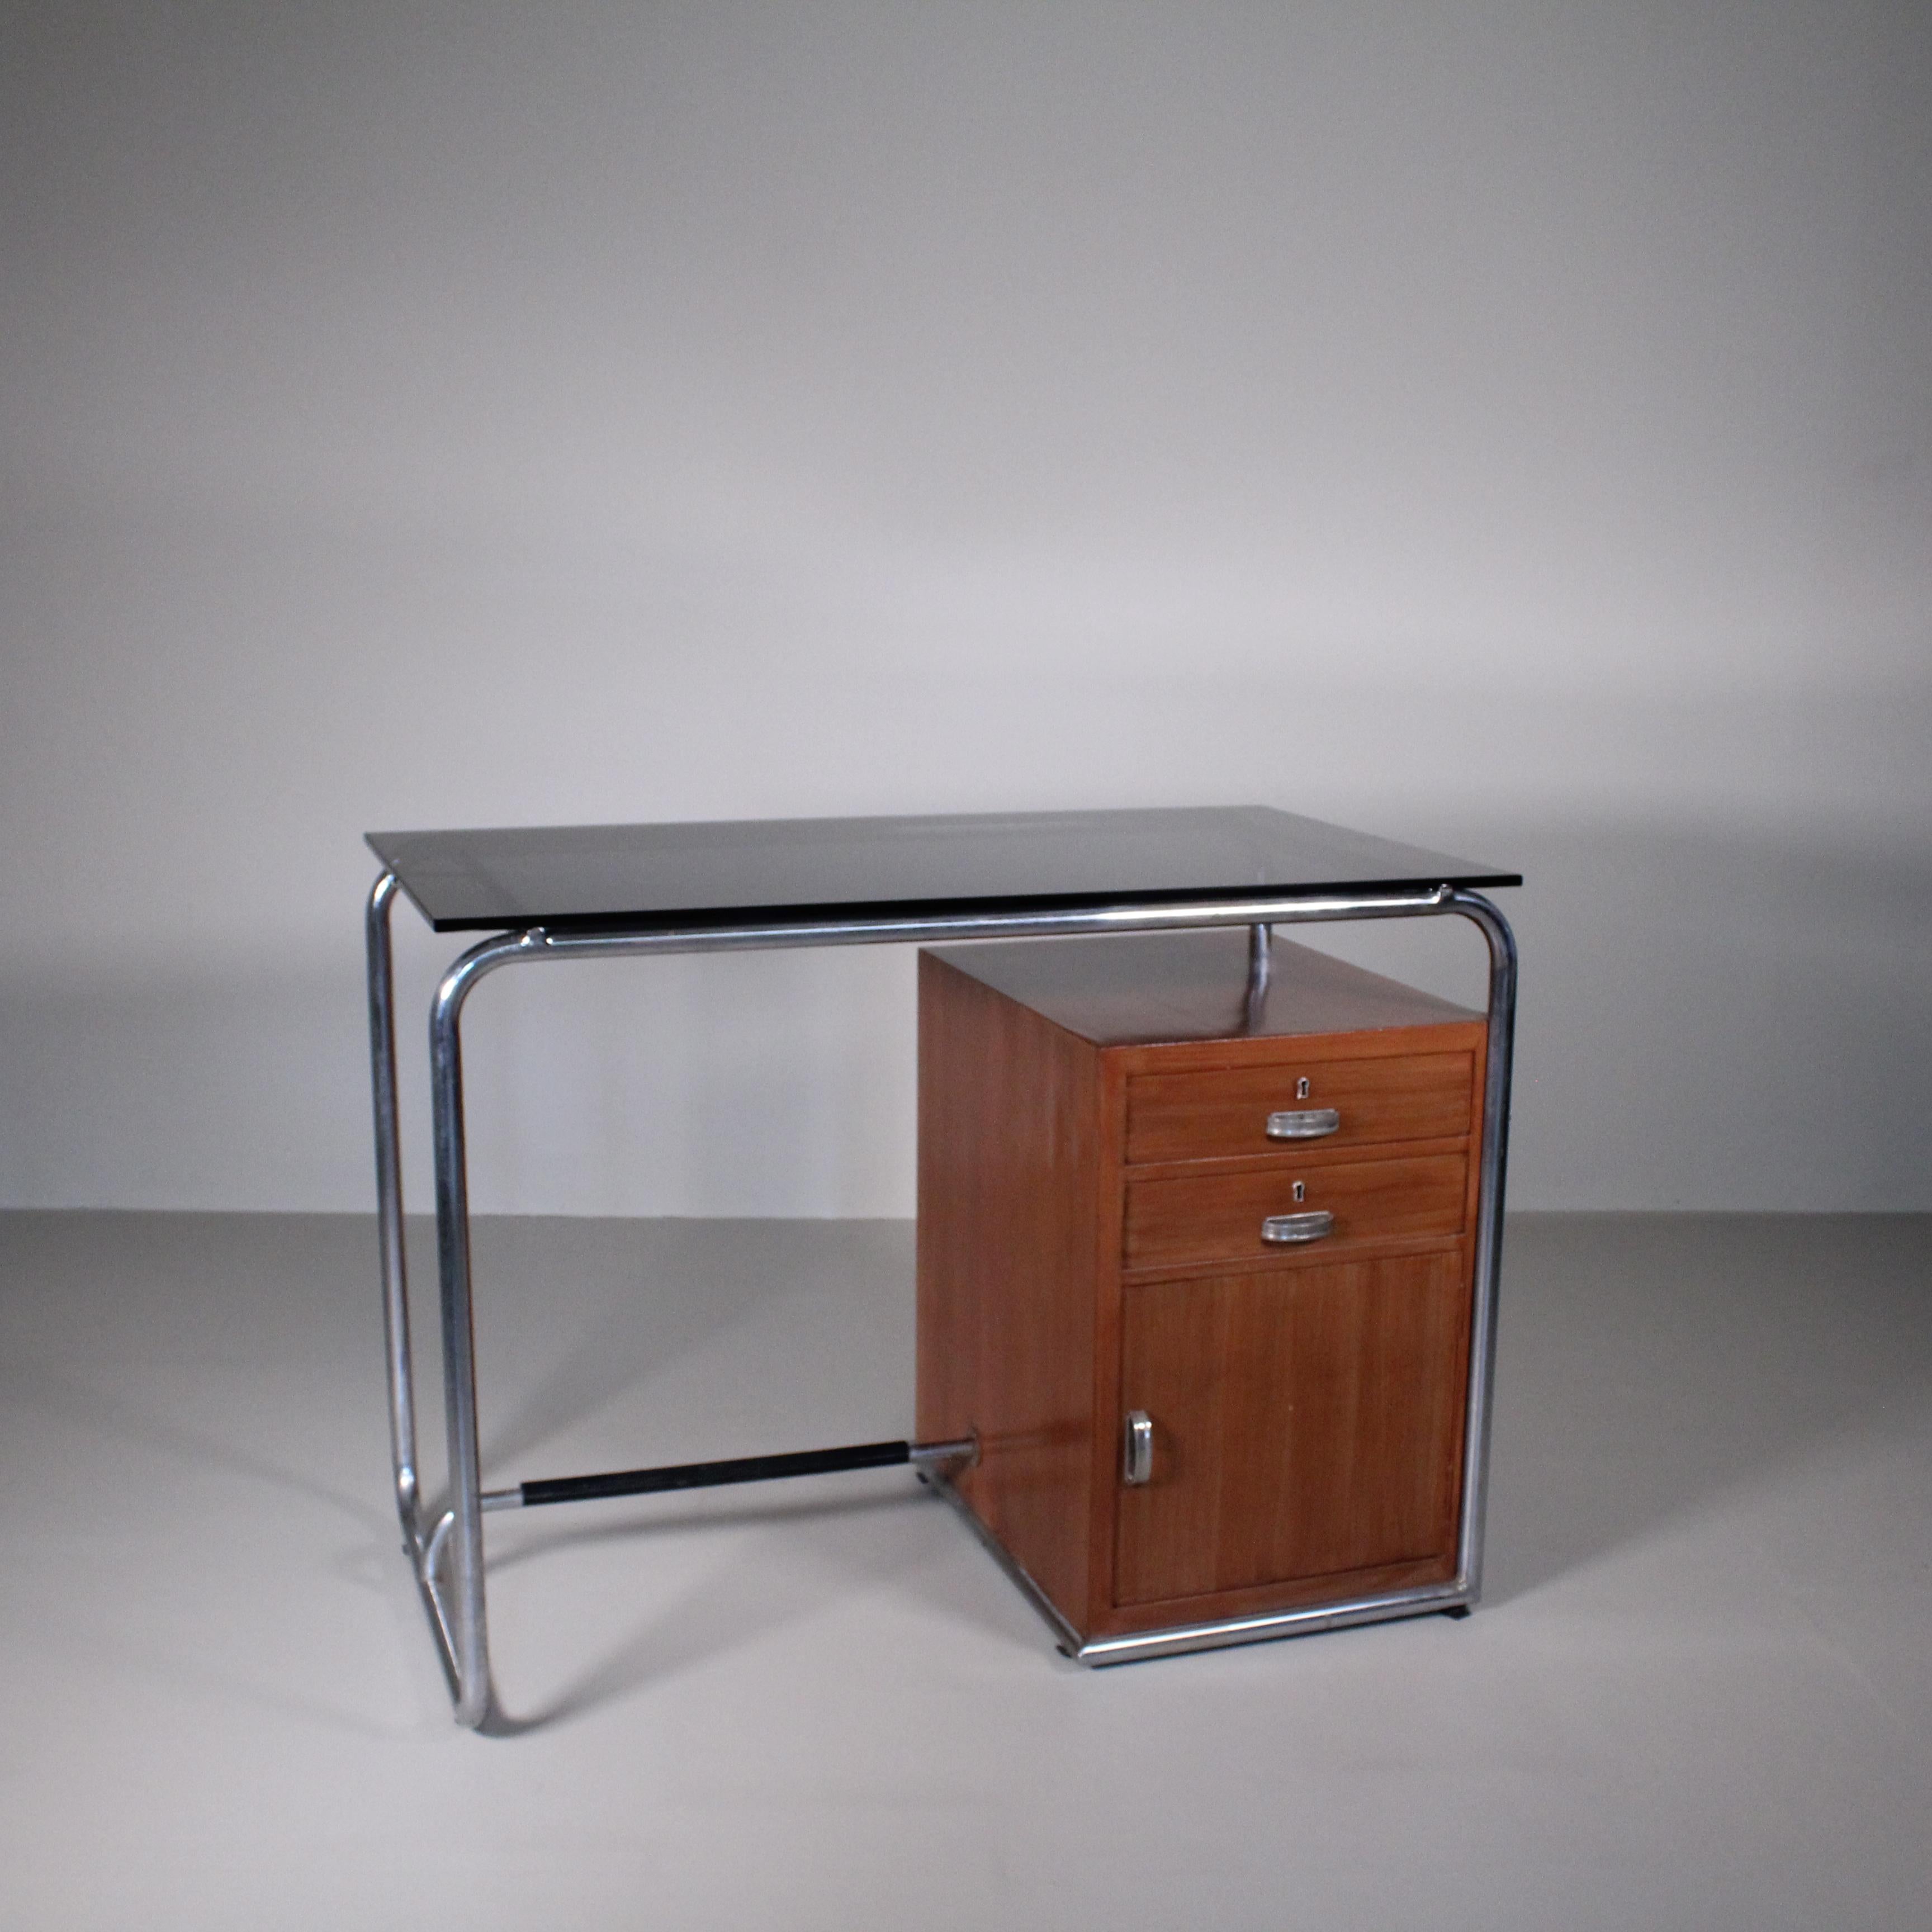 The 1960s functionalist style desk represents a fascinating piece of furniture that embodies the elegant marriage of functionality and aesthetics. This design object, with its tubular metal base, dark glass top, and wooden drawer unit, evokes the